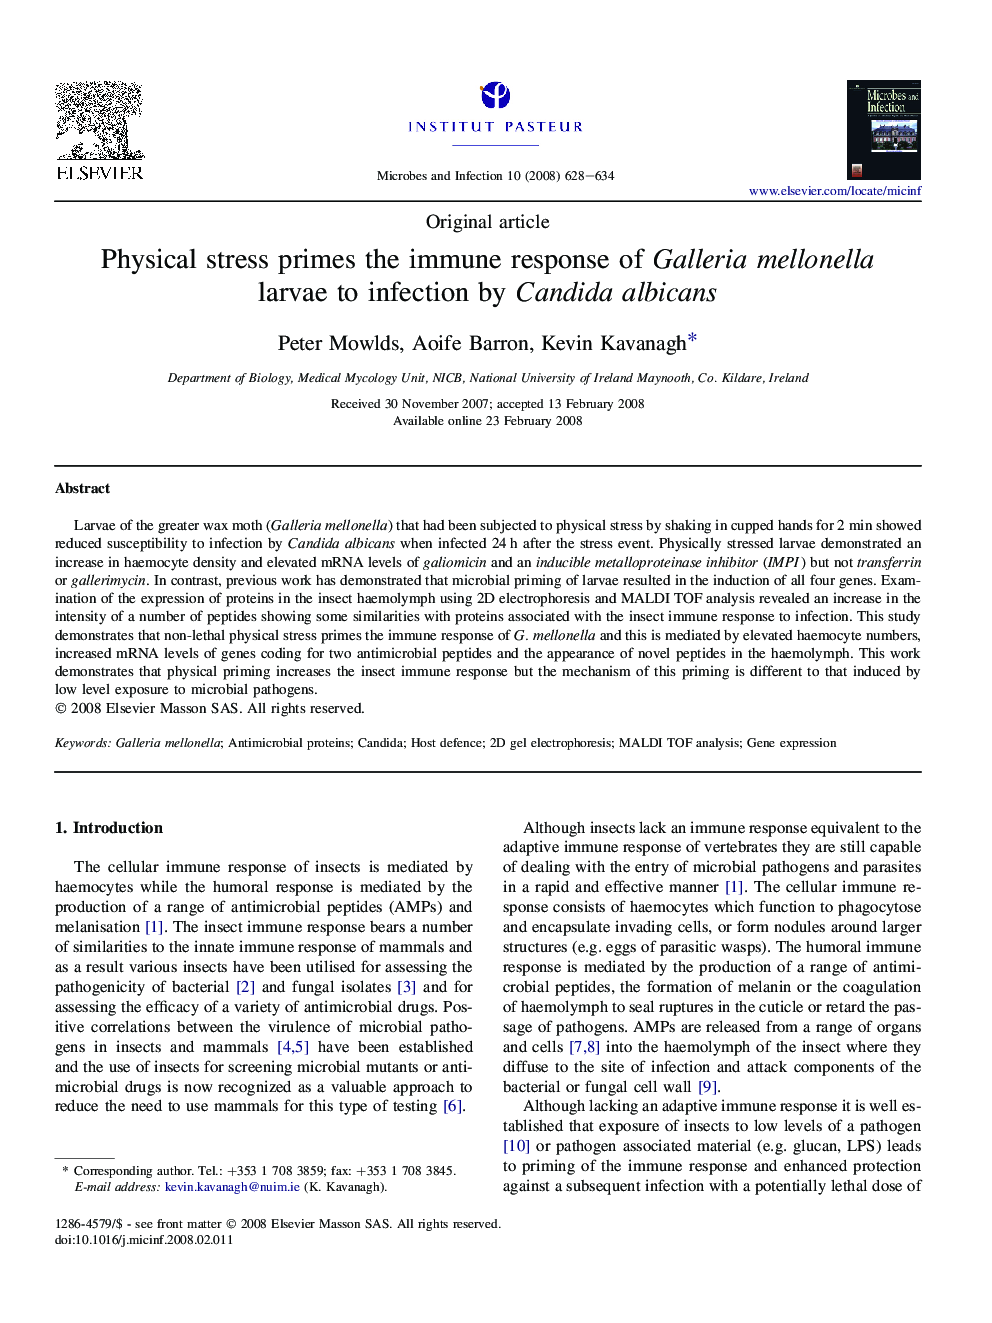 Physical stress primes the immune response of Galleria mellonella larvae to infection by Candida albicans